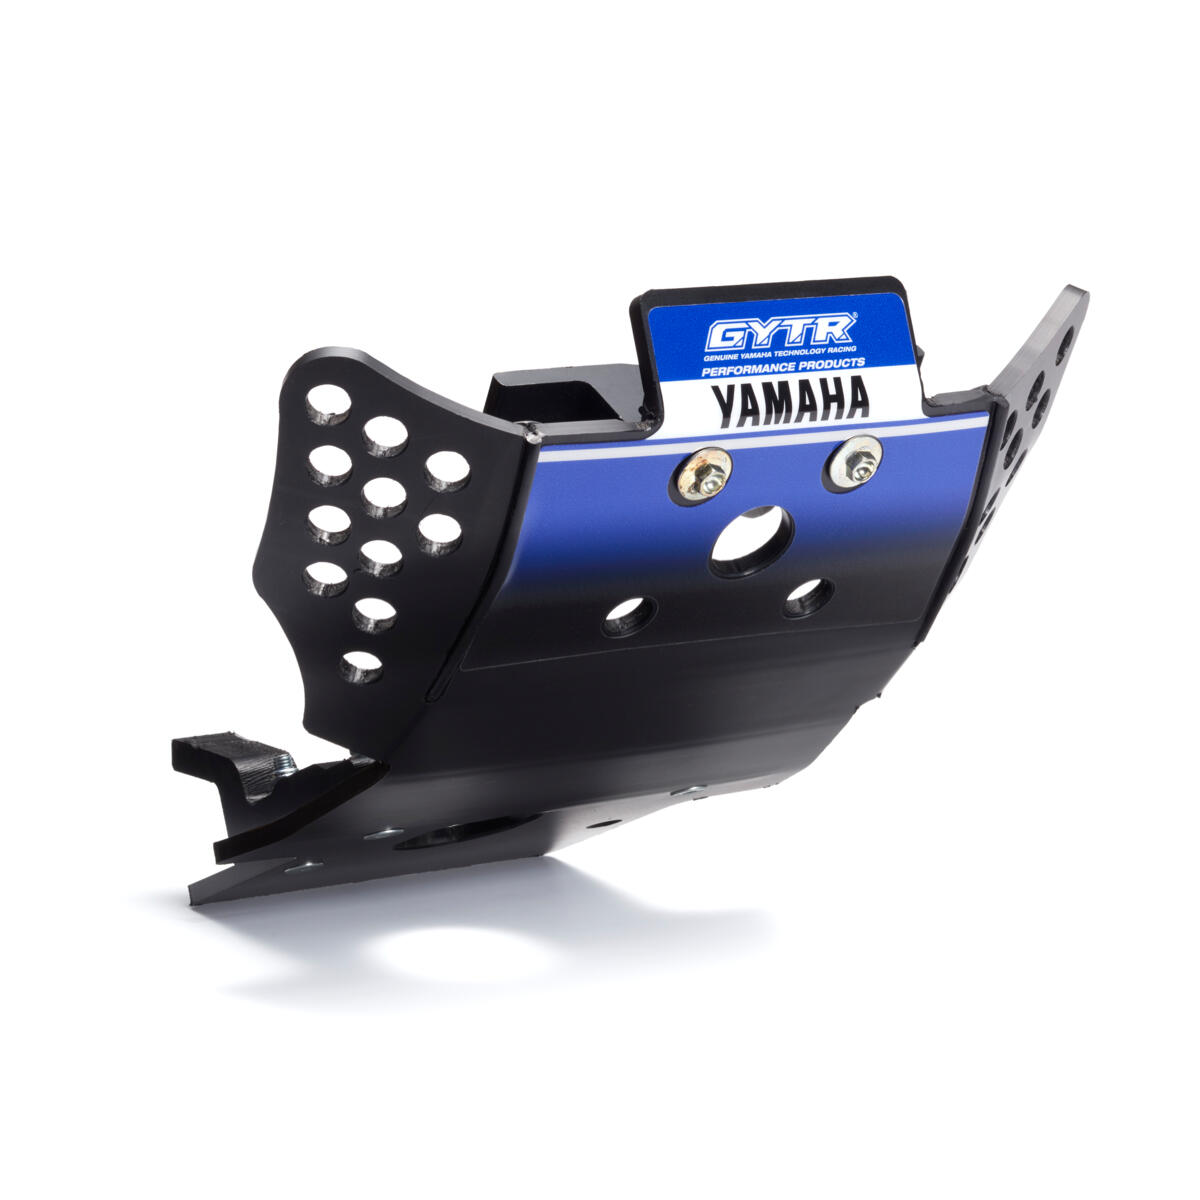 This glide plate is designed to protect engine and frame of your MX bike.